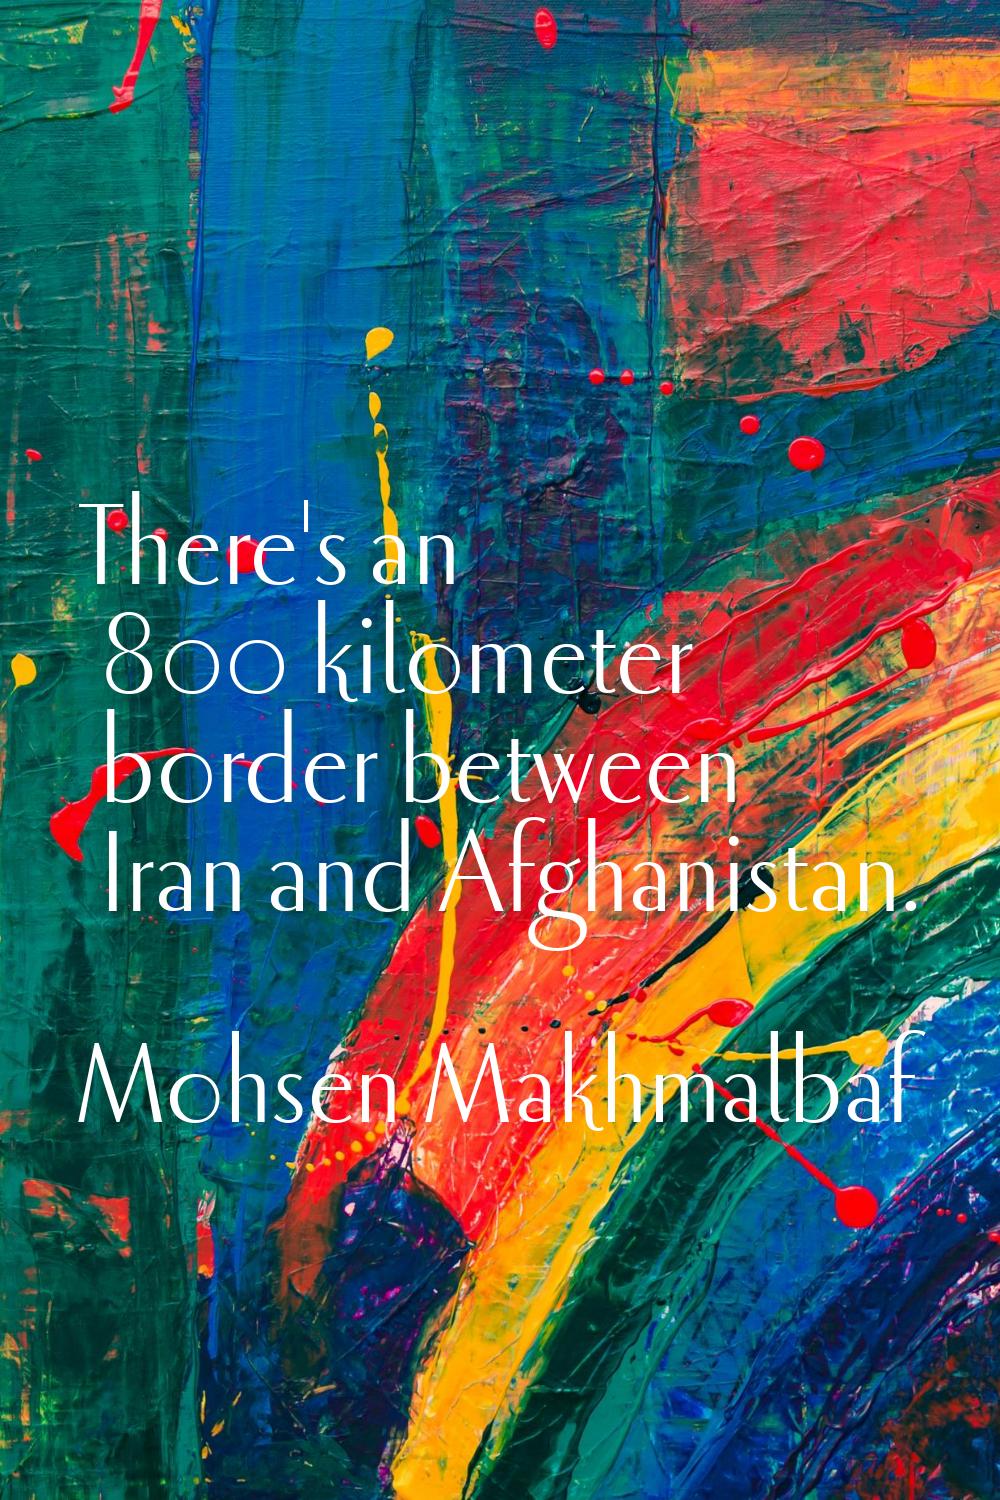 There's an 800 kilometer border between Iran and Afghanistan.